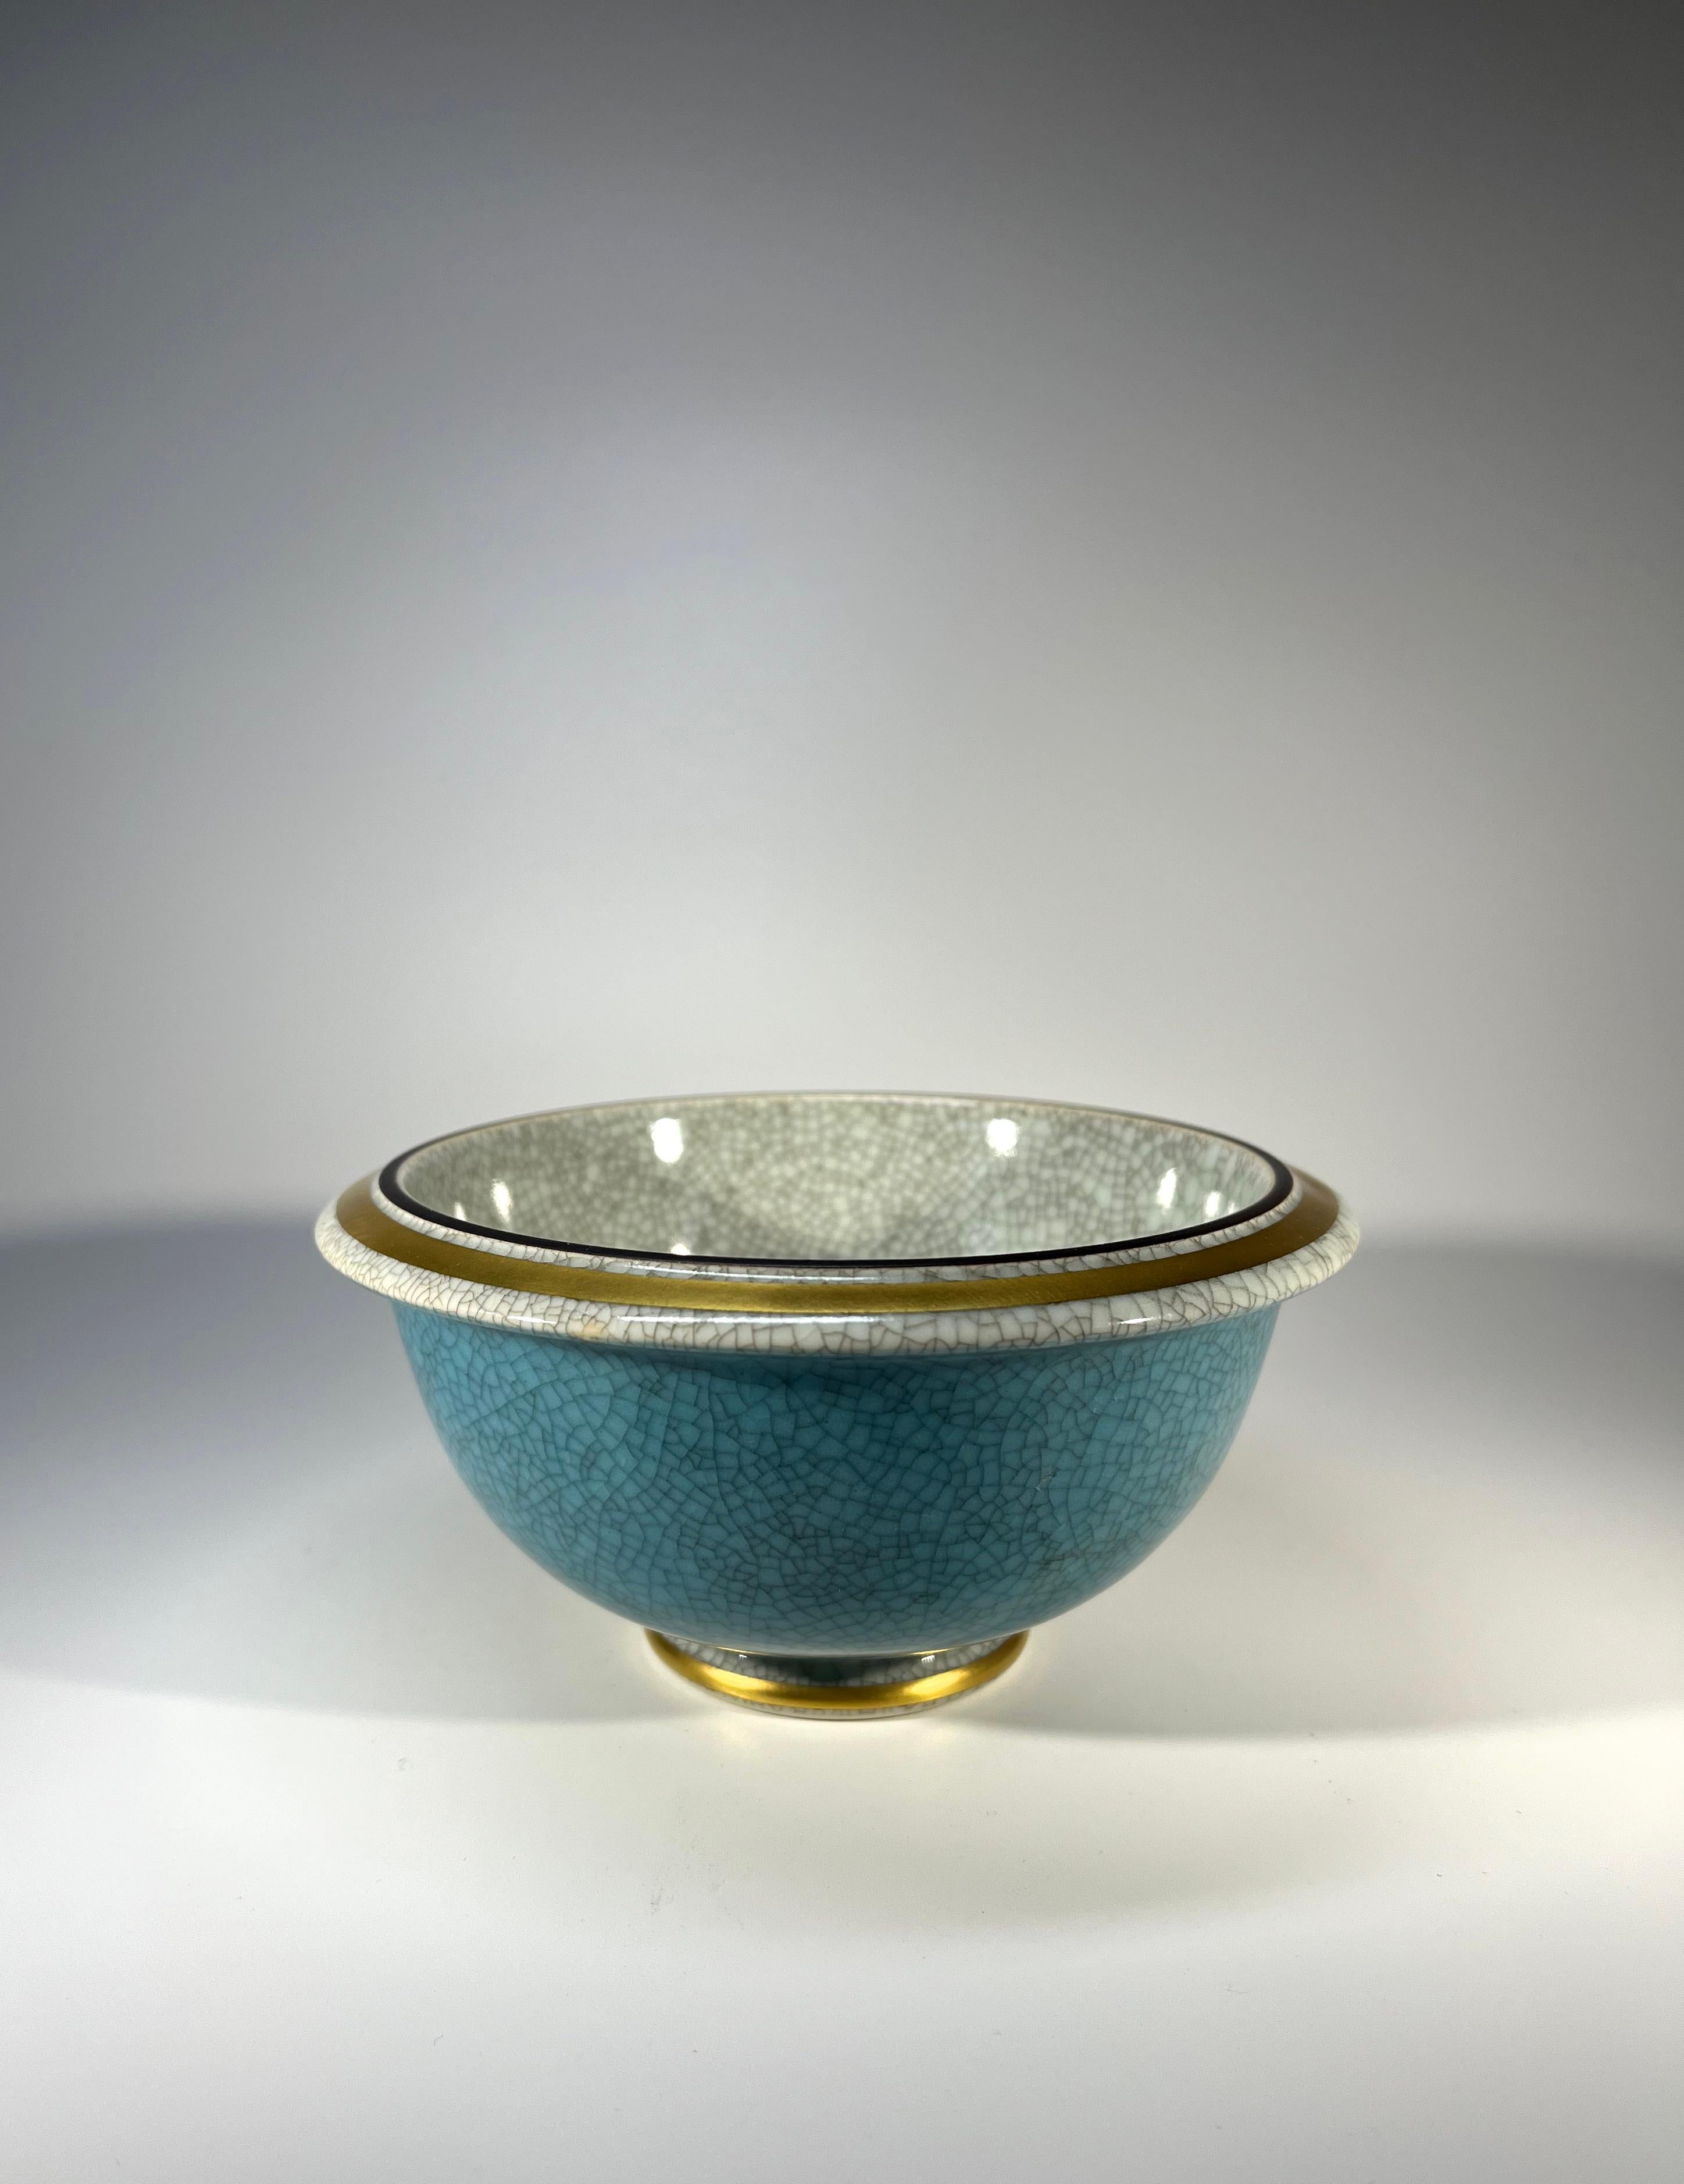 Pudding basin shaped Royal Copenhagen porcelain, turquoise and grey crackle glazed bowl
A weighty bowl decorated with broad gilded band to rim
A super piece from Thorkild Olsen
Circa 1960's
Stamped and numbered 2527
Height 2.5 inch, Diameter 5.5